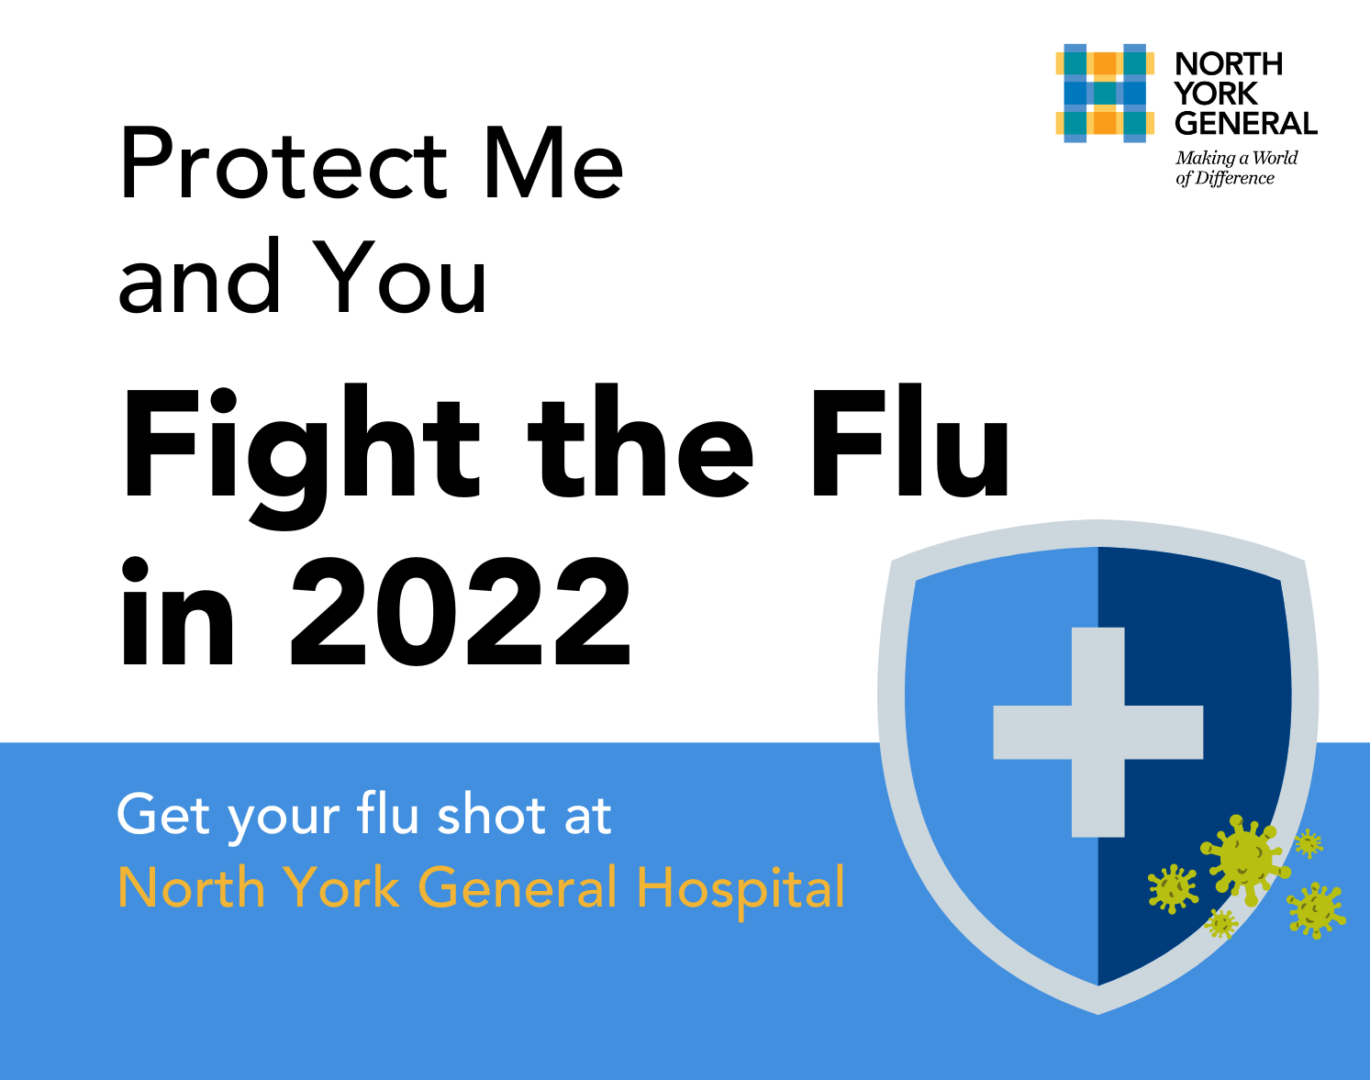 Protect me and you. Fight the Flu in 2022